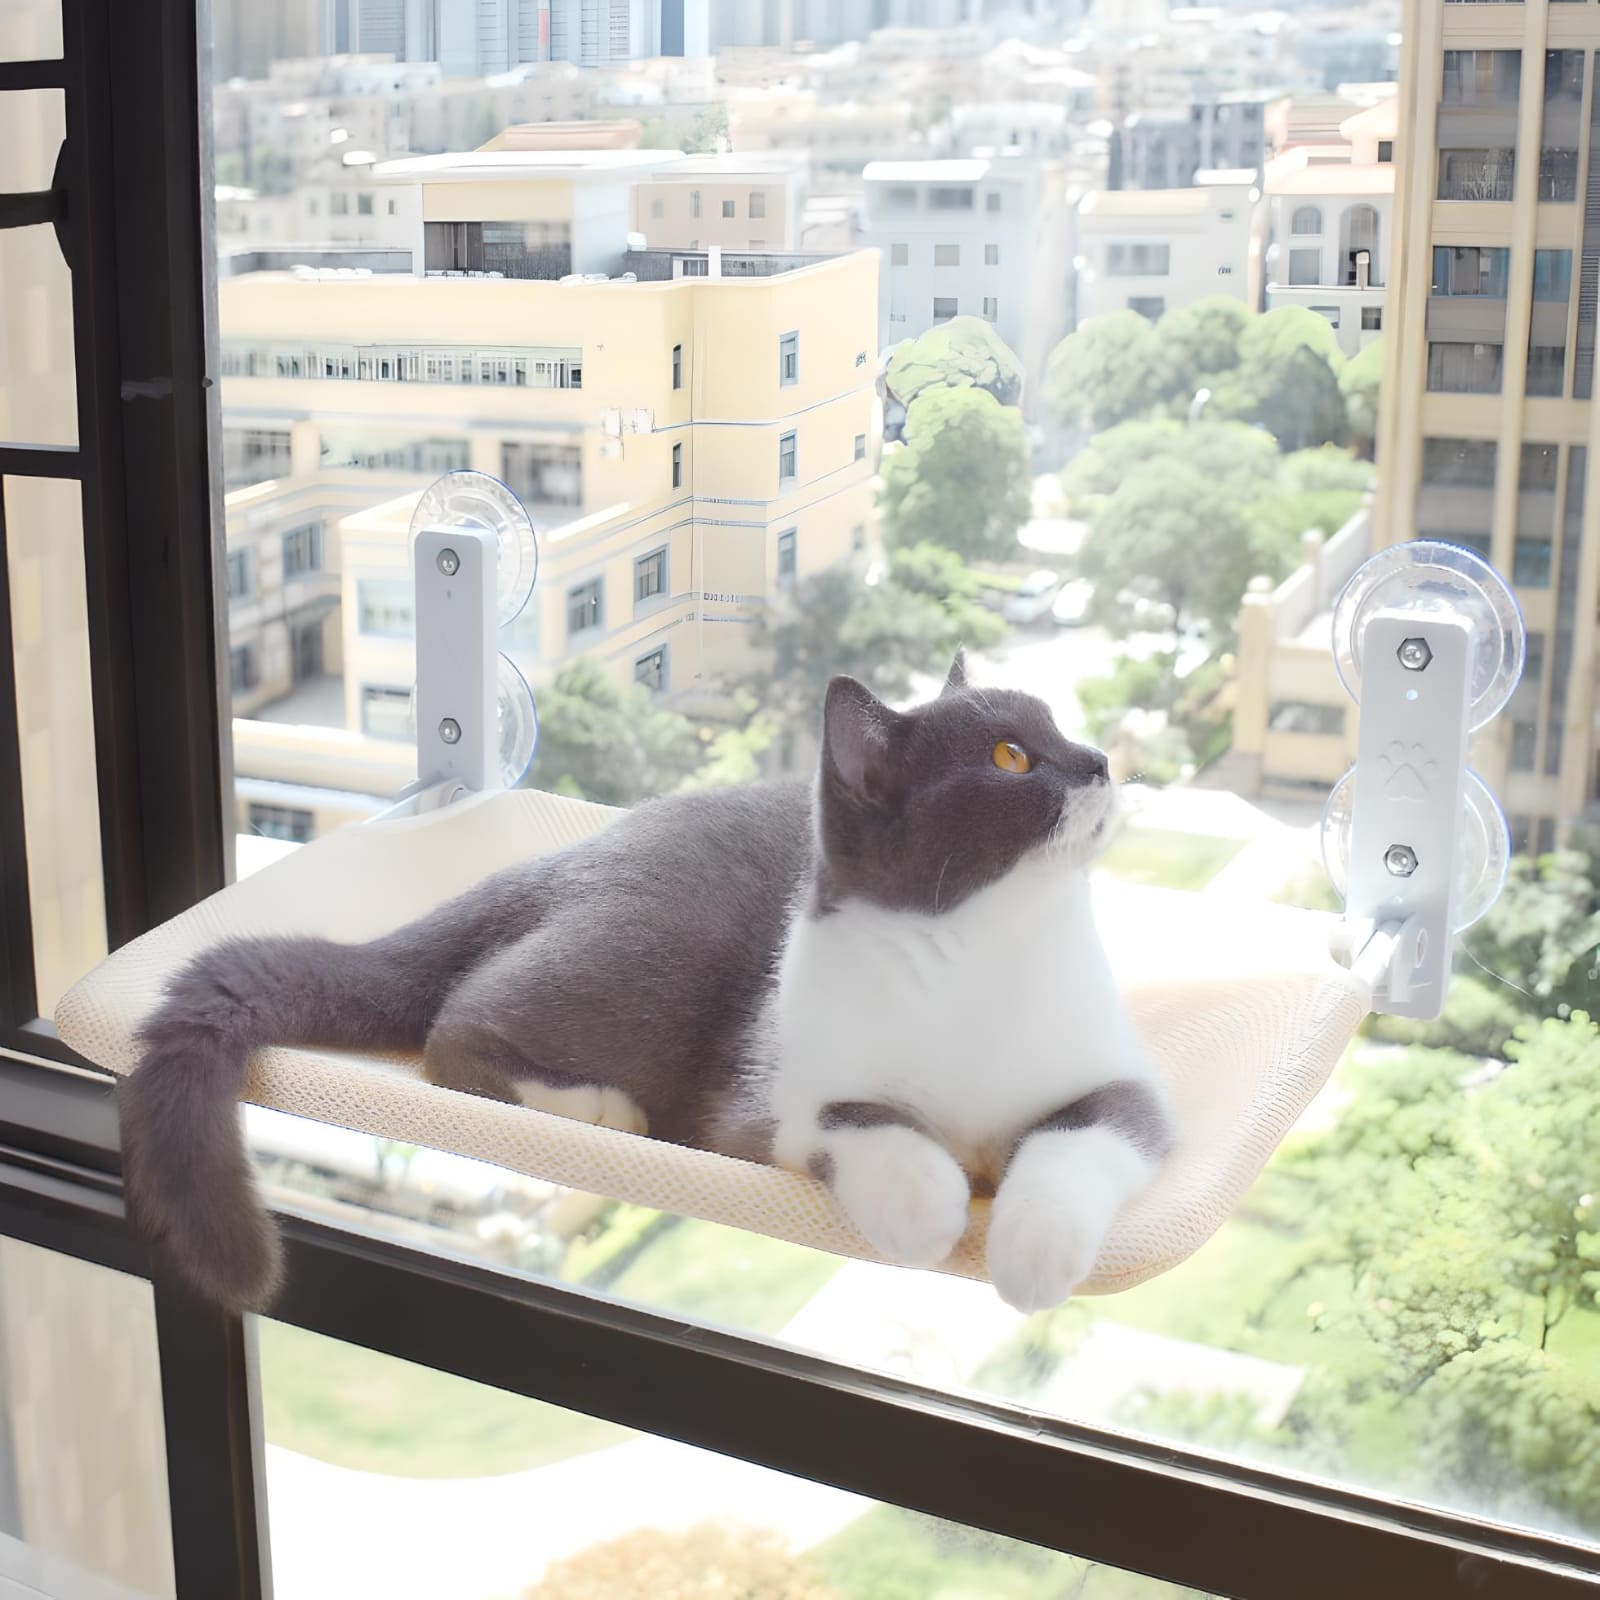 grey-and-white-pattern-cat-seating-on-foldable-window-perch